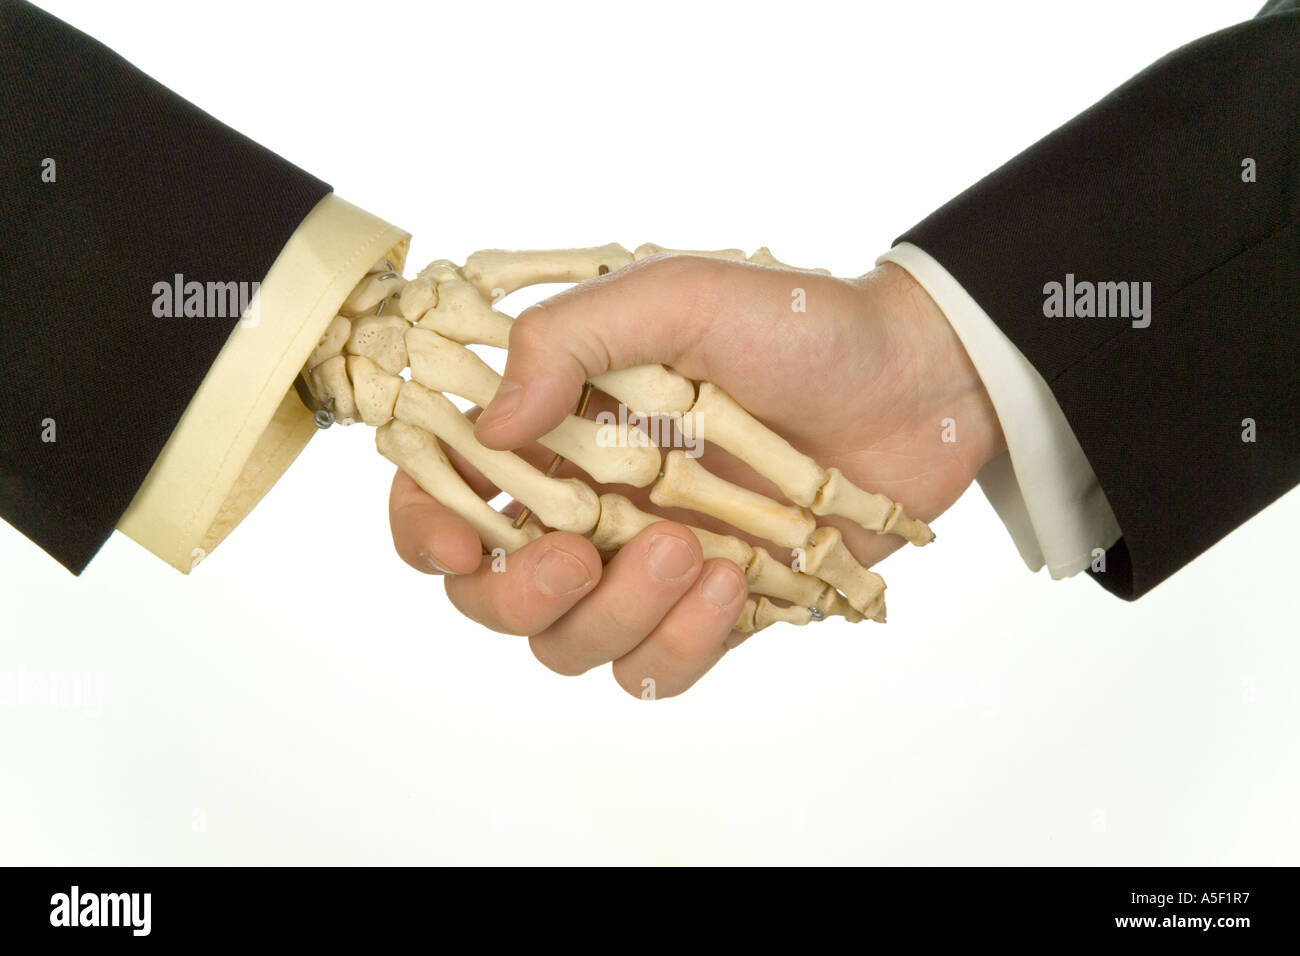 skeleton-hand-in-suit-shaking-hands-with-business-man-A5F1R7.jpg